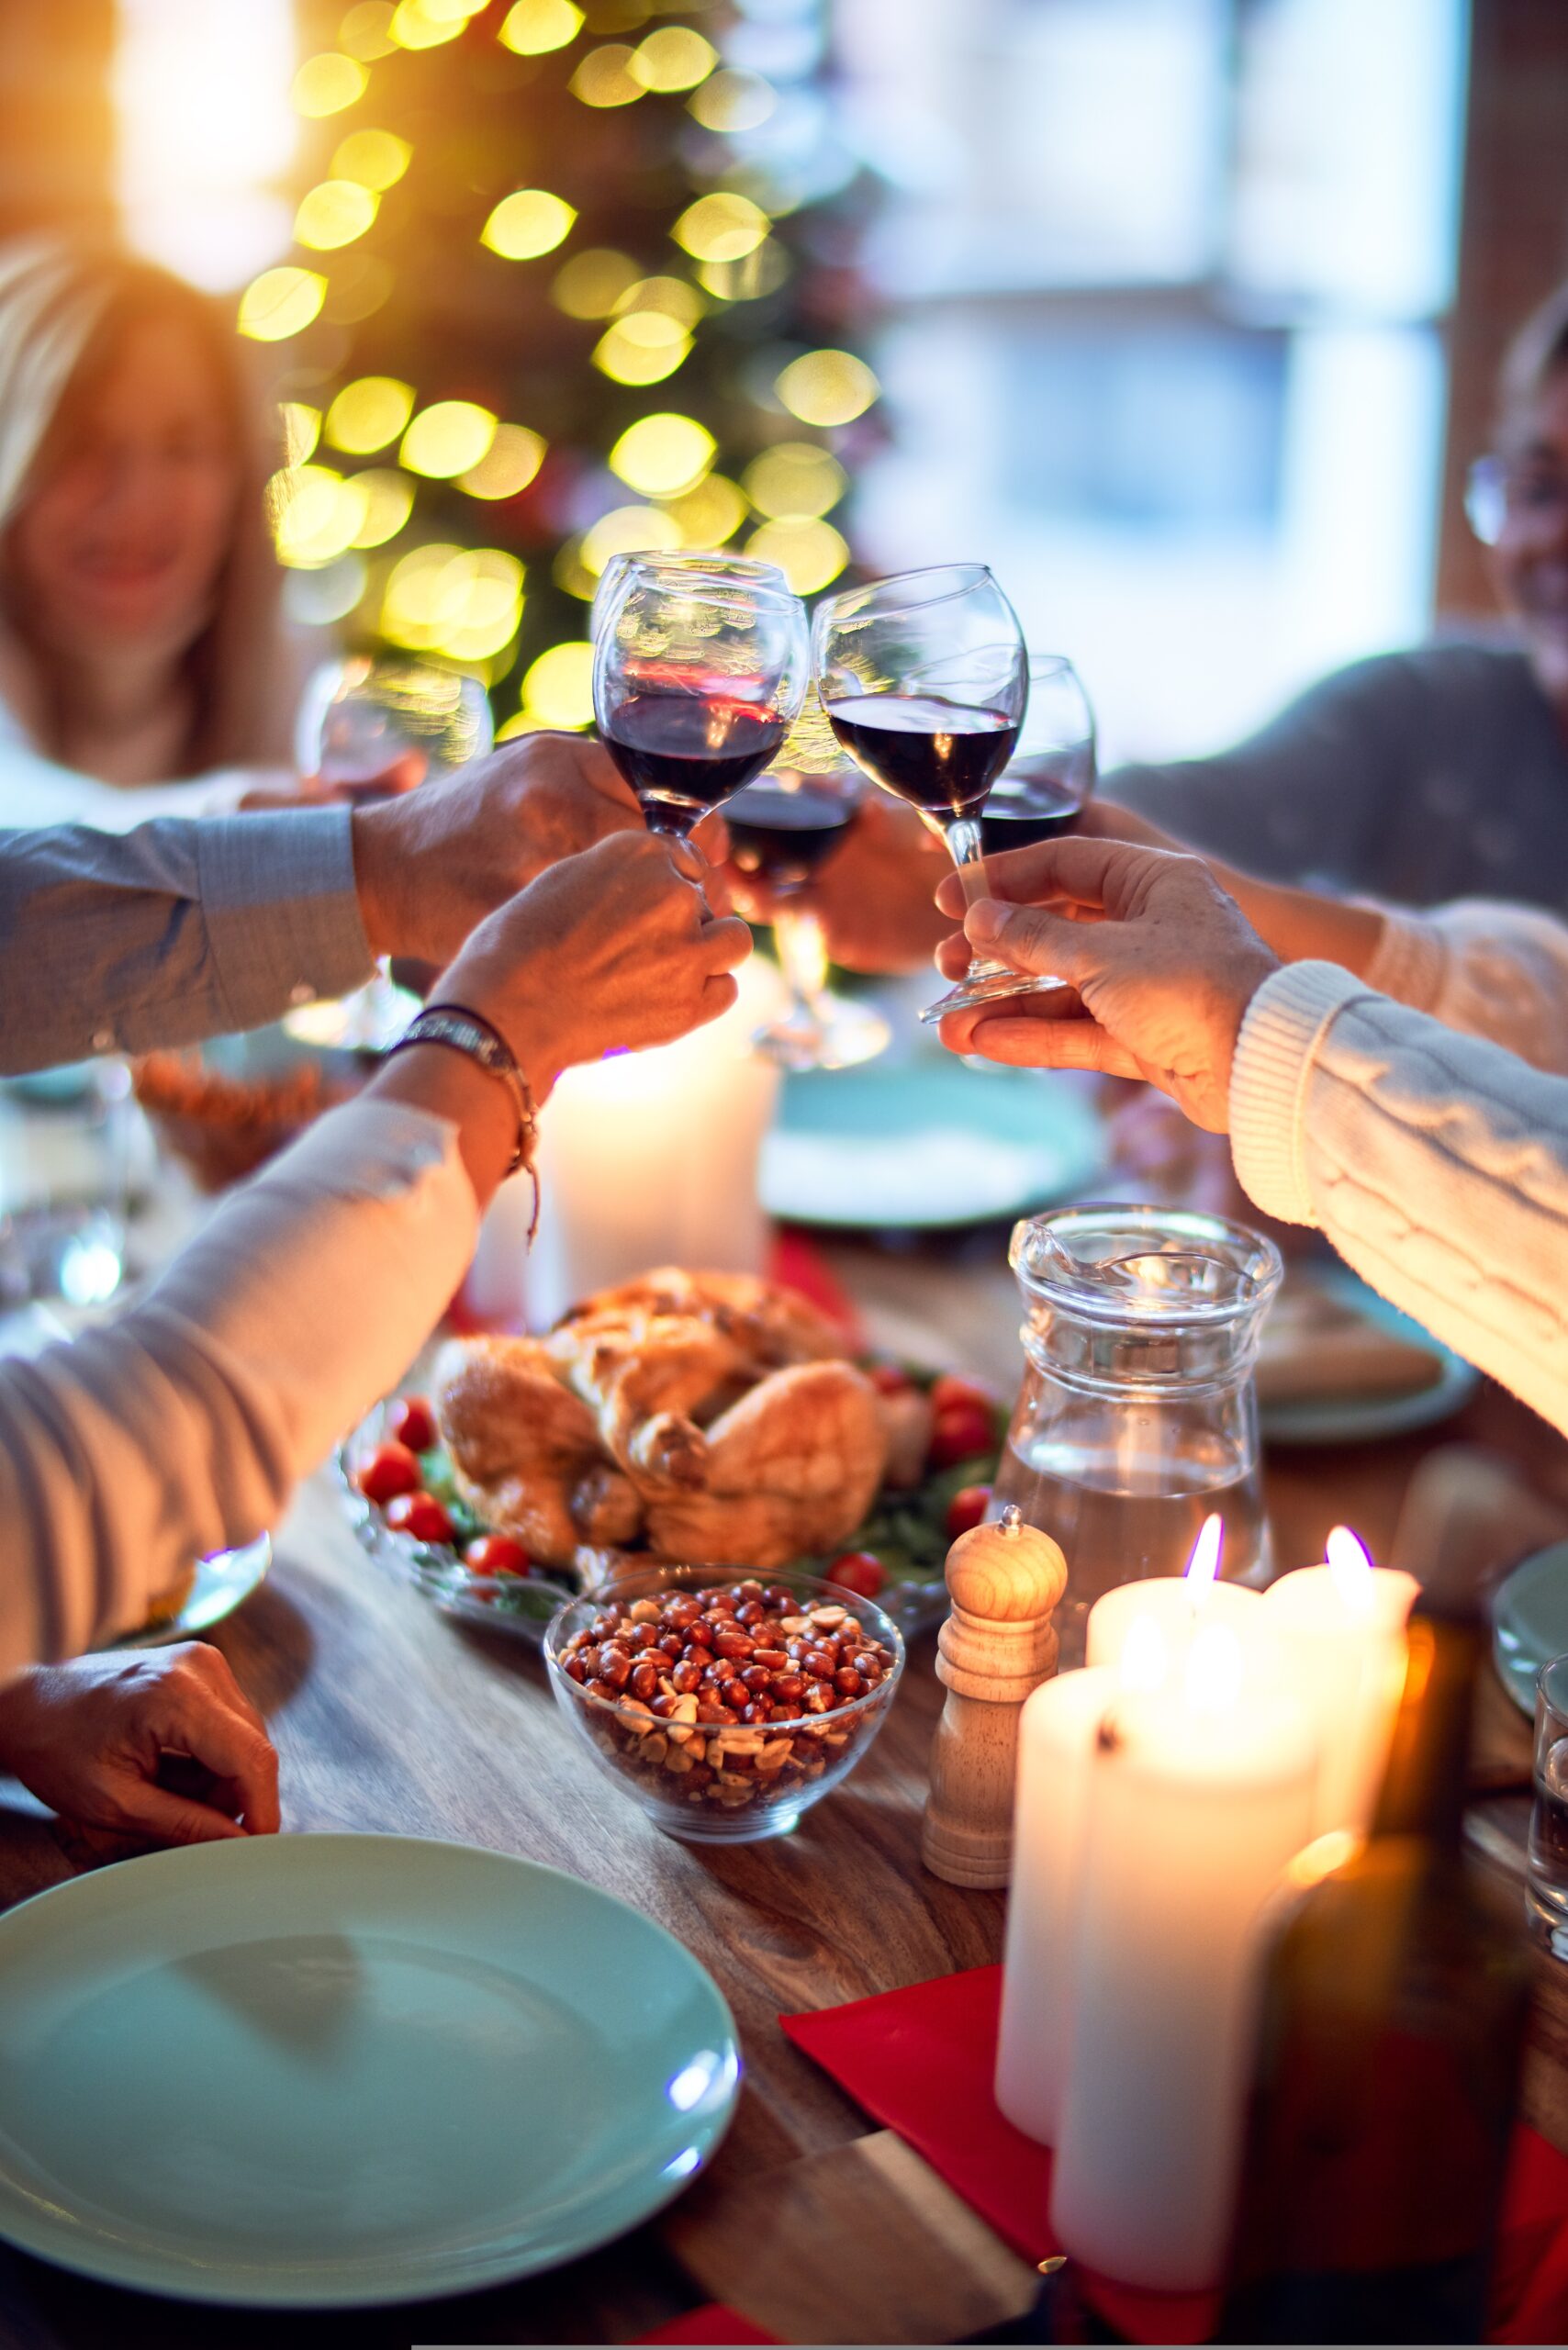 5 easy ways to maintain your healthy eating habits through the holidays.